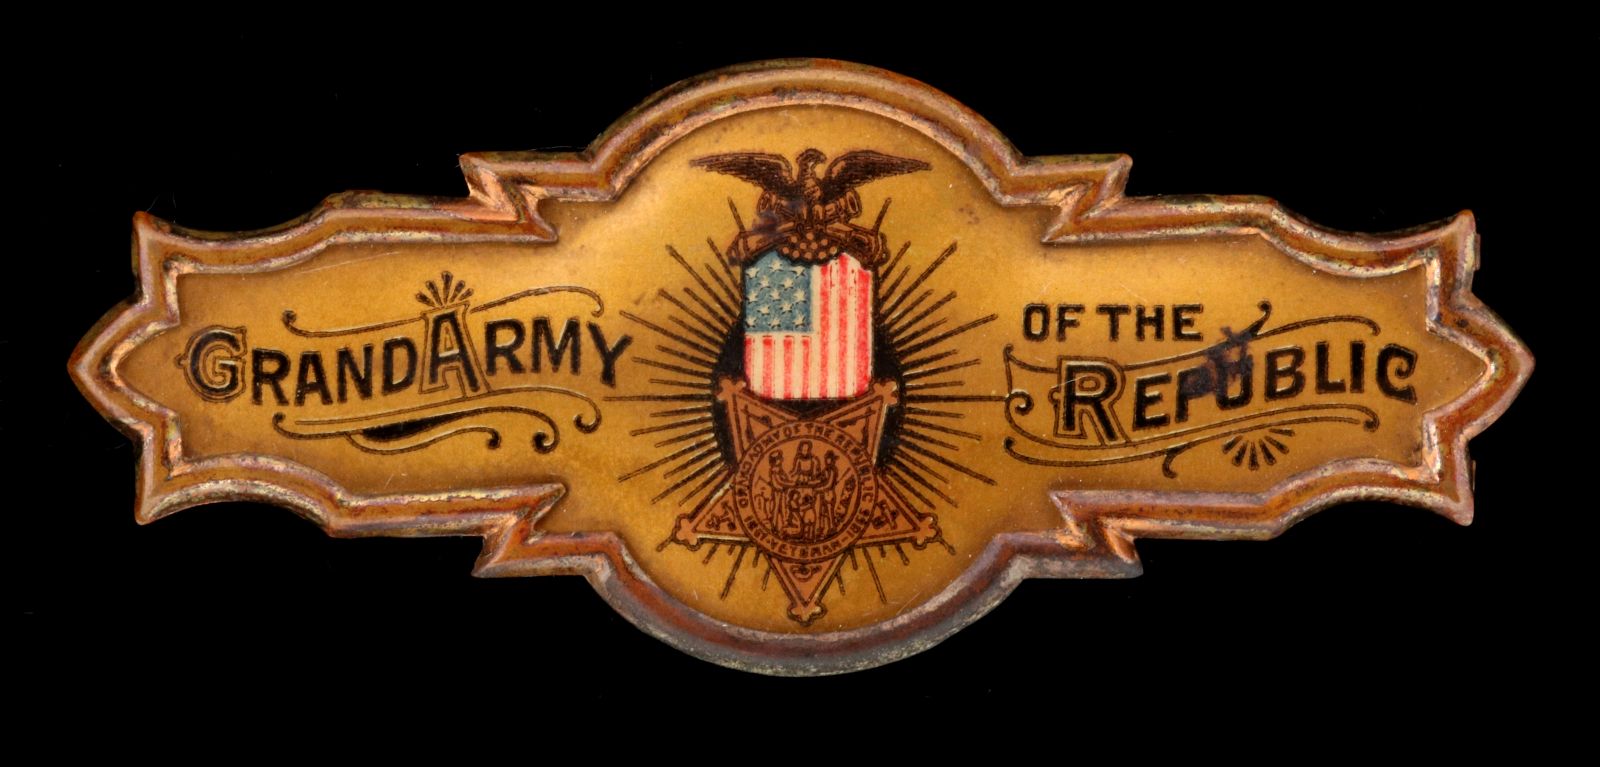 A NICE GRAND ARMY OF THE REPUBLIC FRAMED BADGE